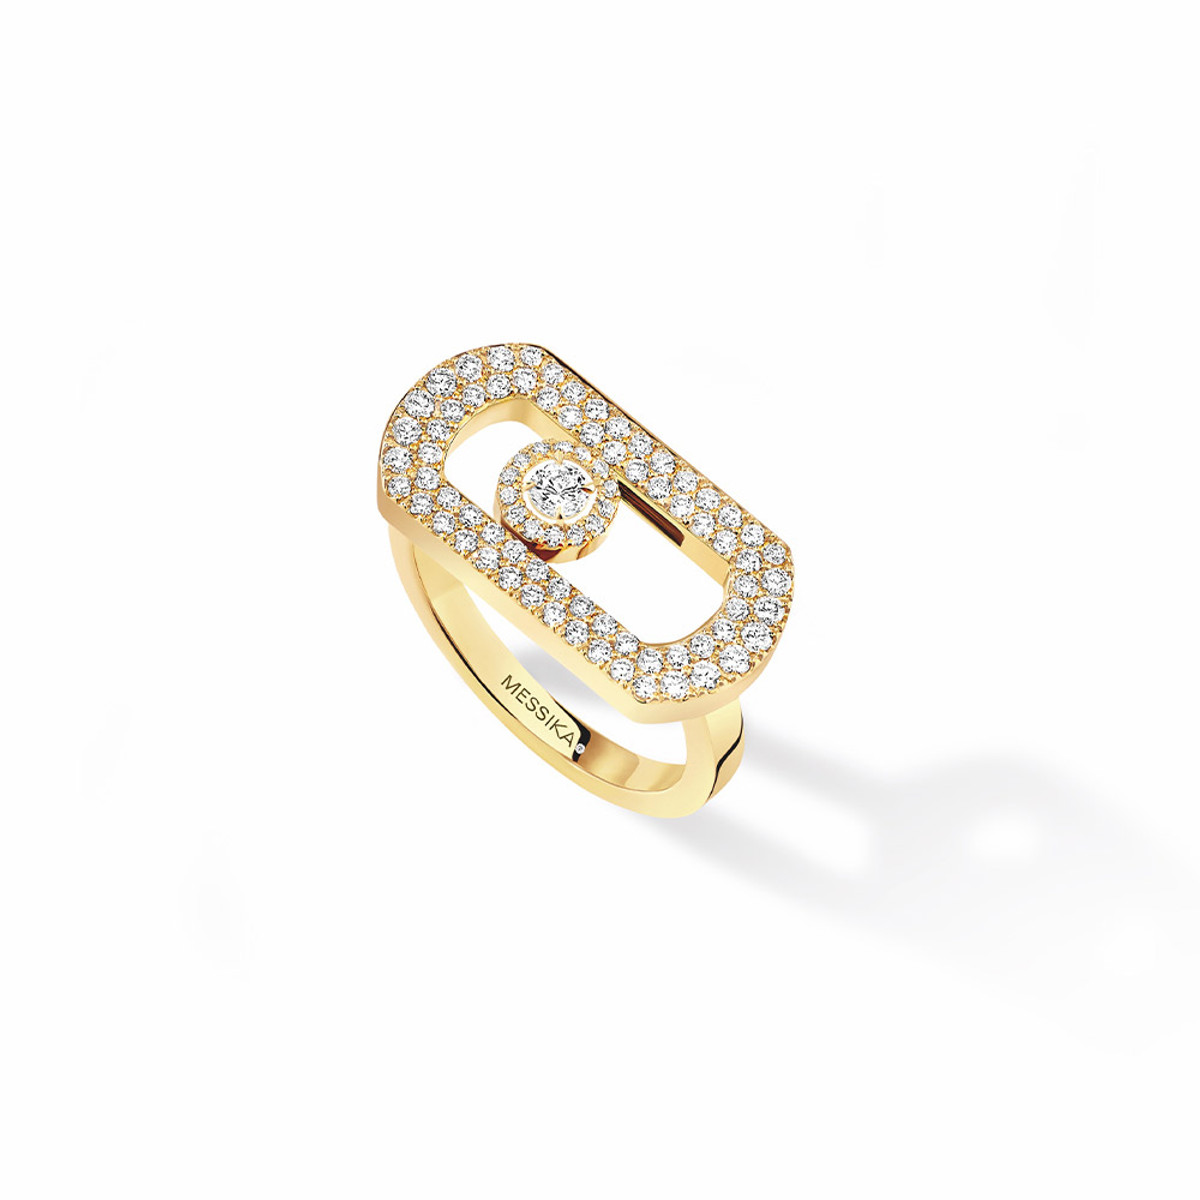 Messika 18K Yellow Gold Move Citizen Diamond Pave Ring-56323 Product Image